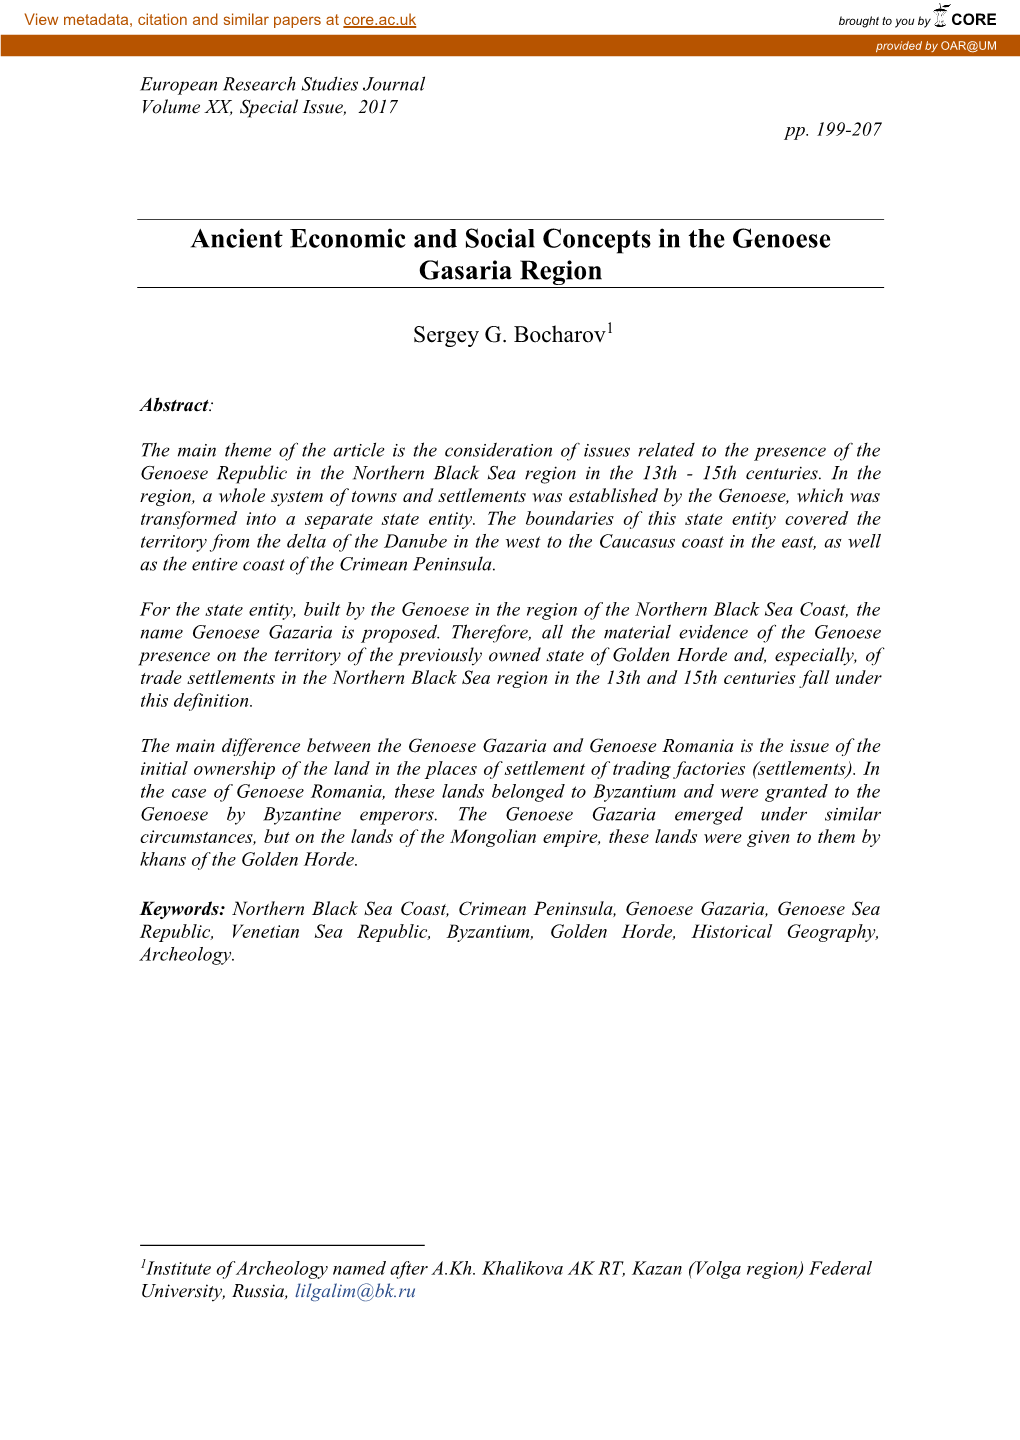 Ancient Economic and Social Concepts in the Genoese Gasaria Region